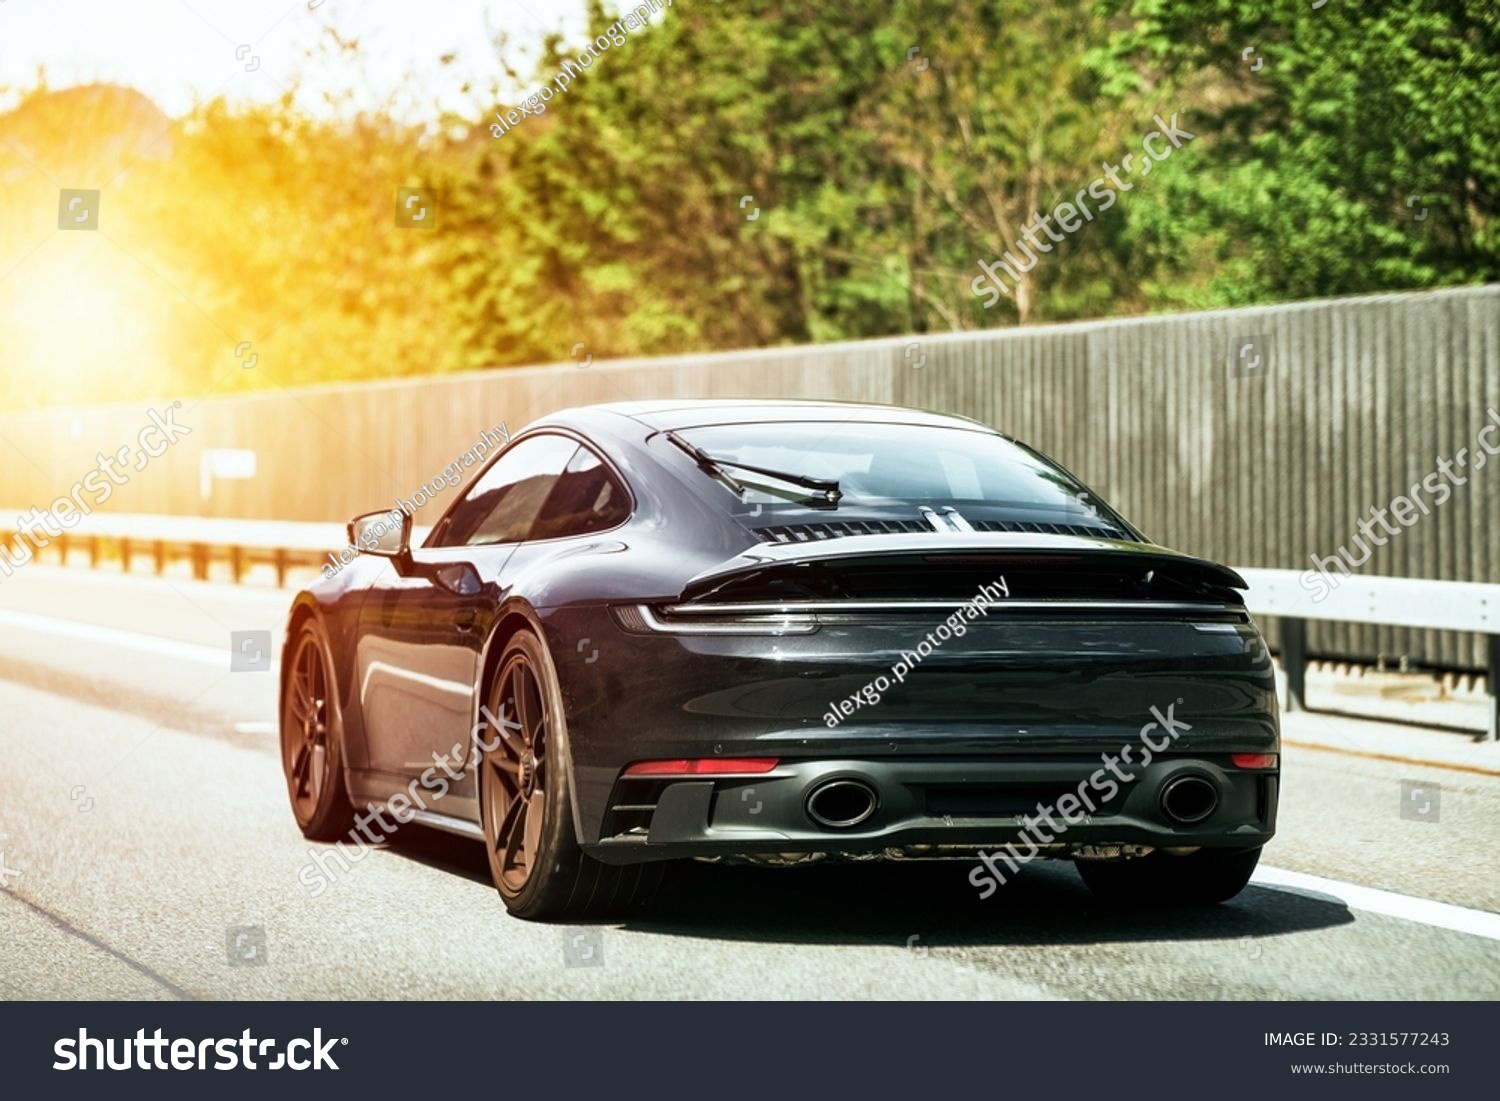 Sleek Black German Roadster. Brand New Luxury Carrera Sports Car on the Highway. Rear view of the 911 GTS sports car. #2331577243